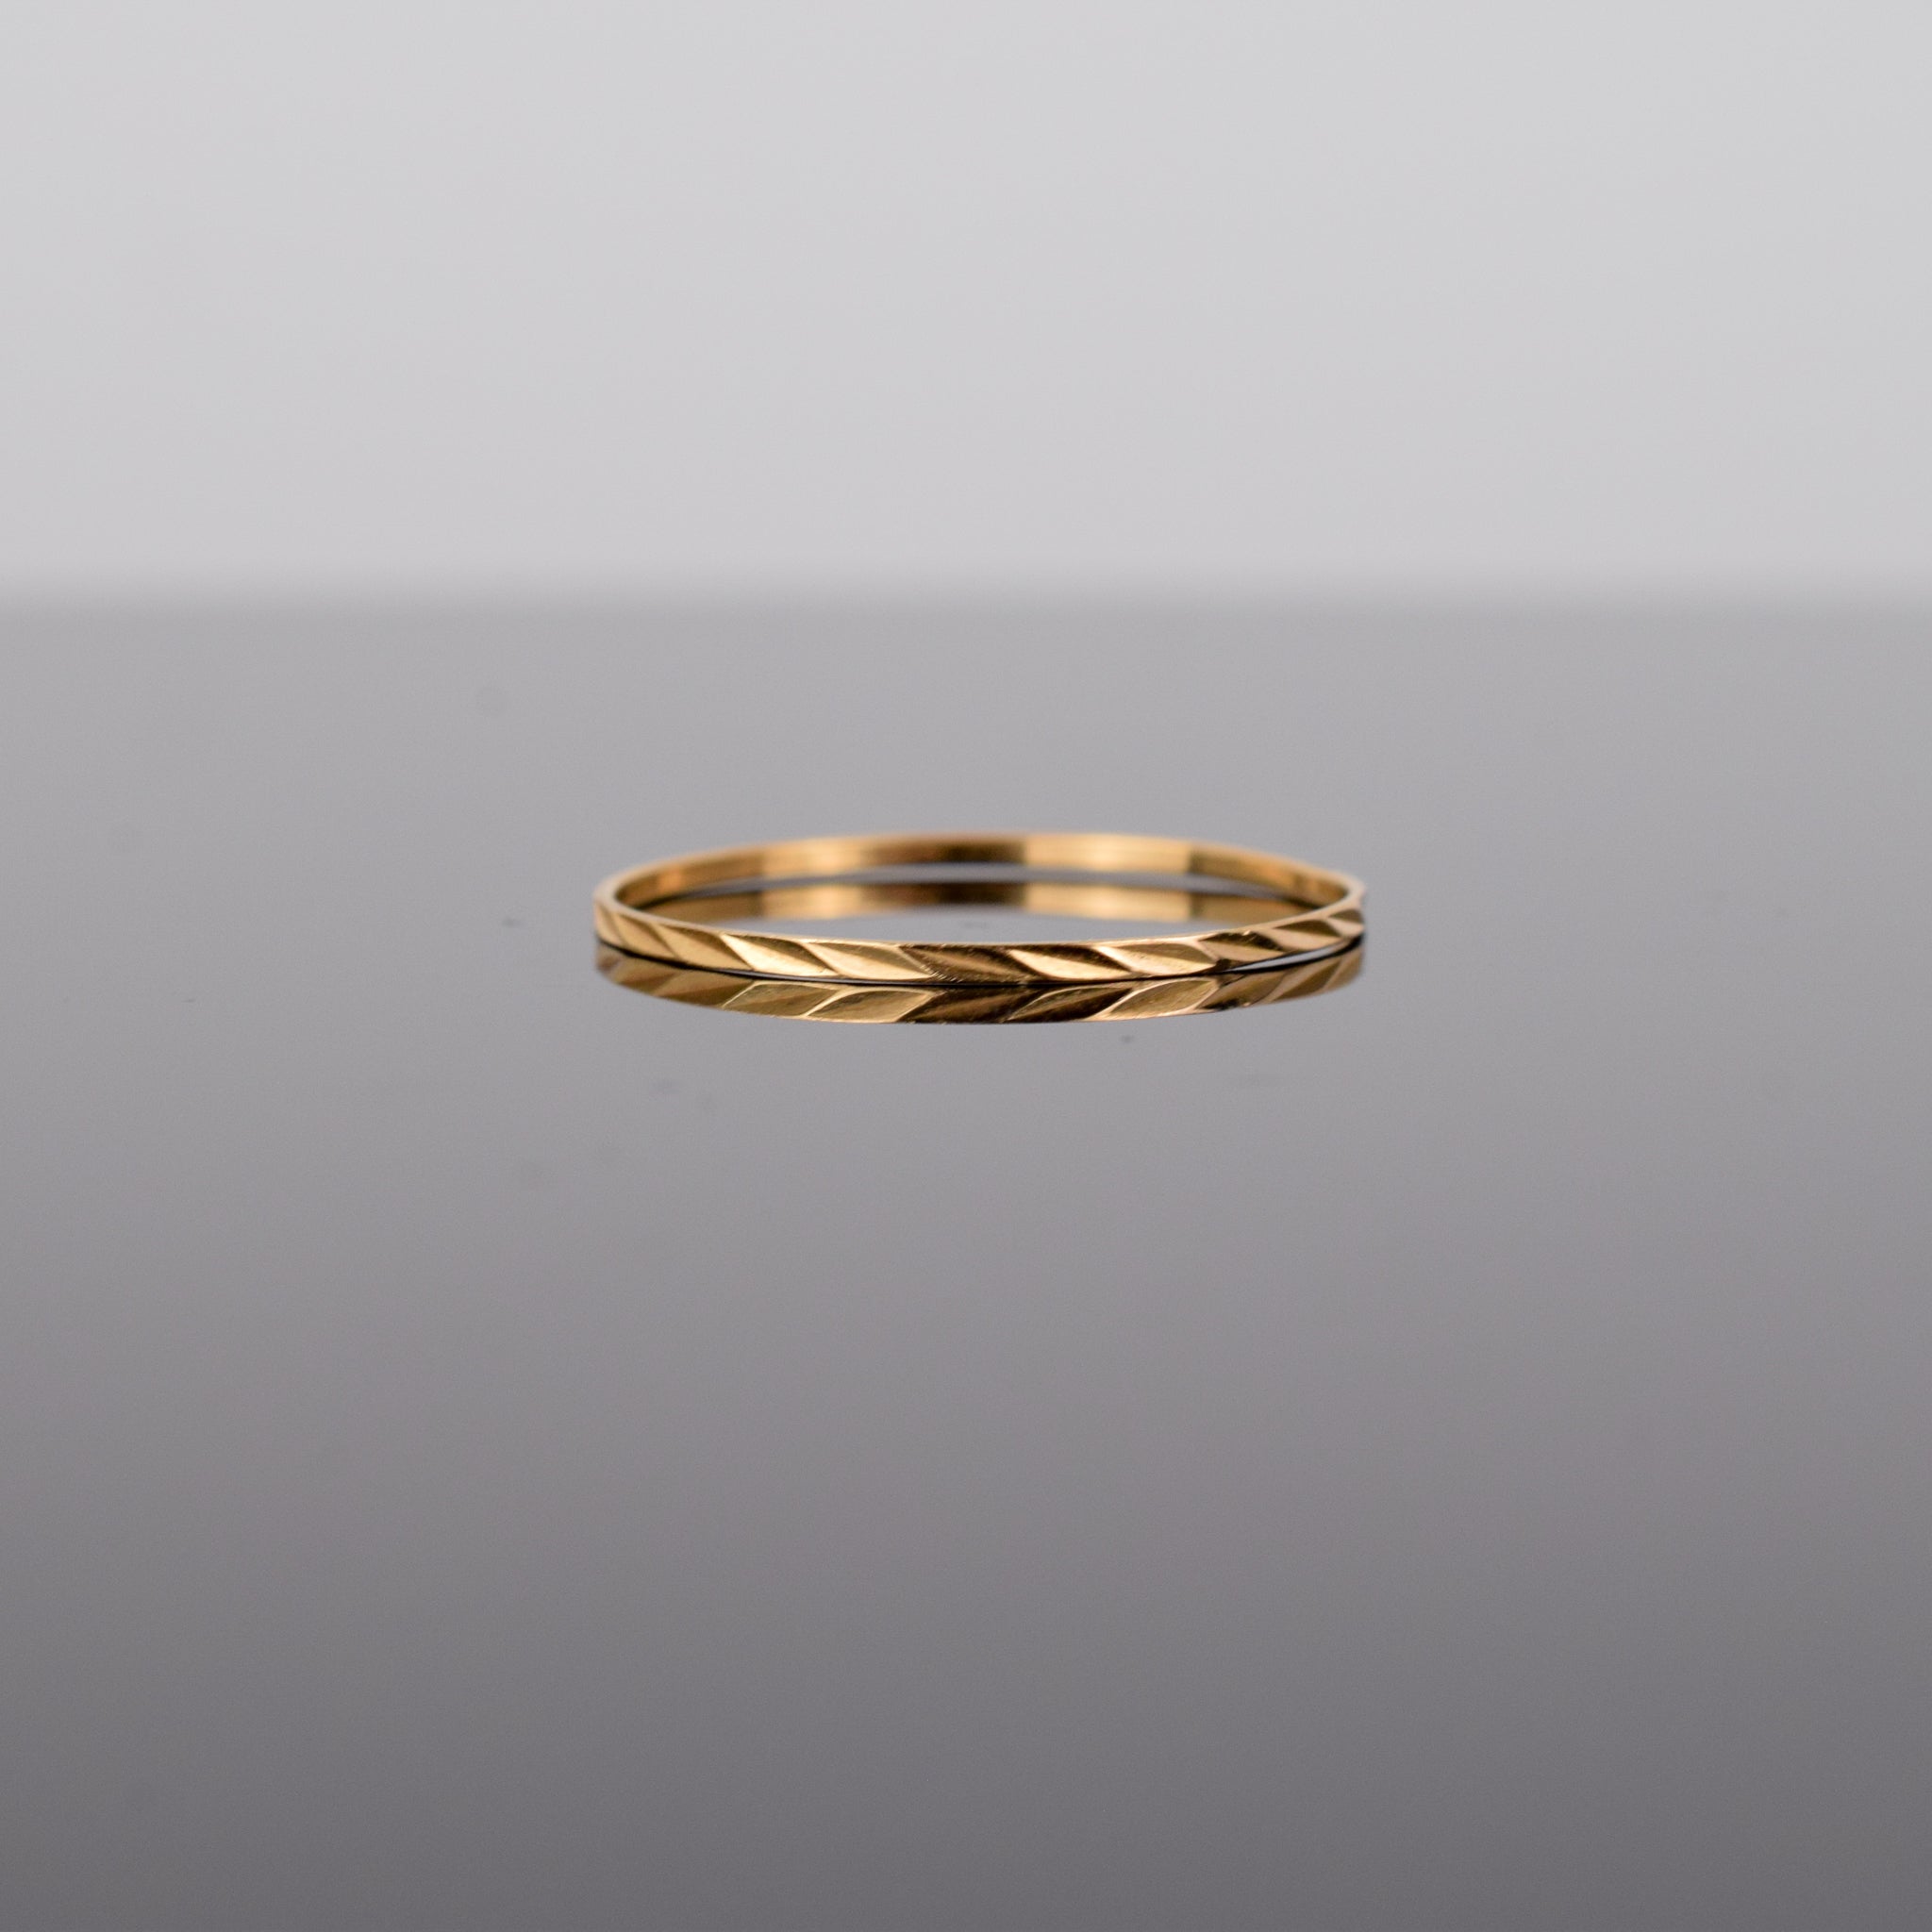 dainty gold stacking ring, folklor